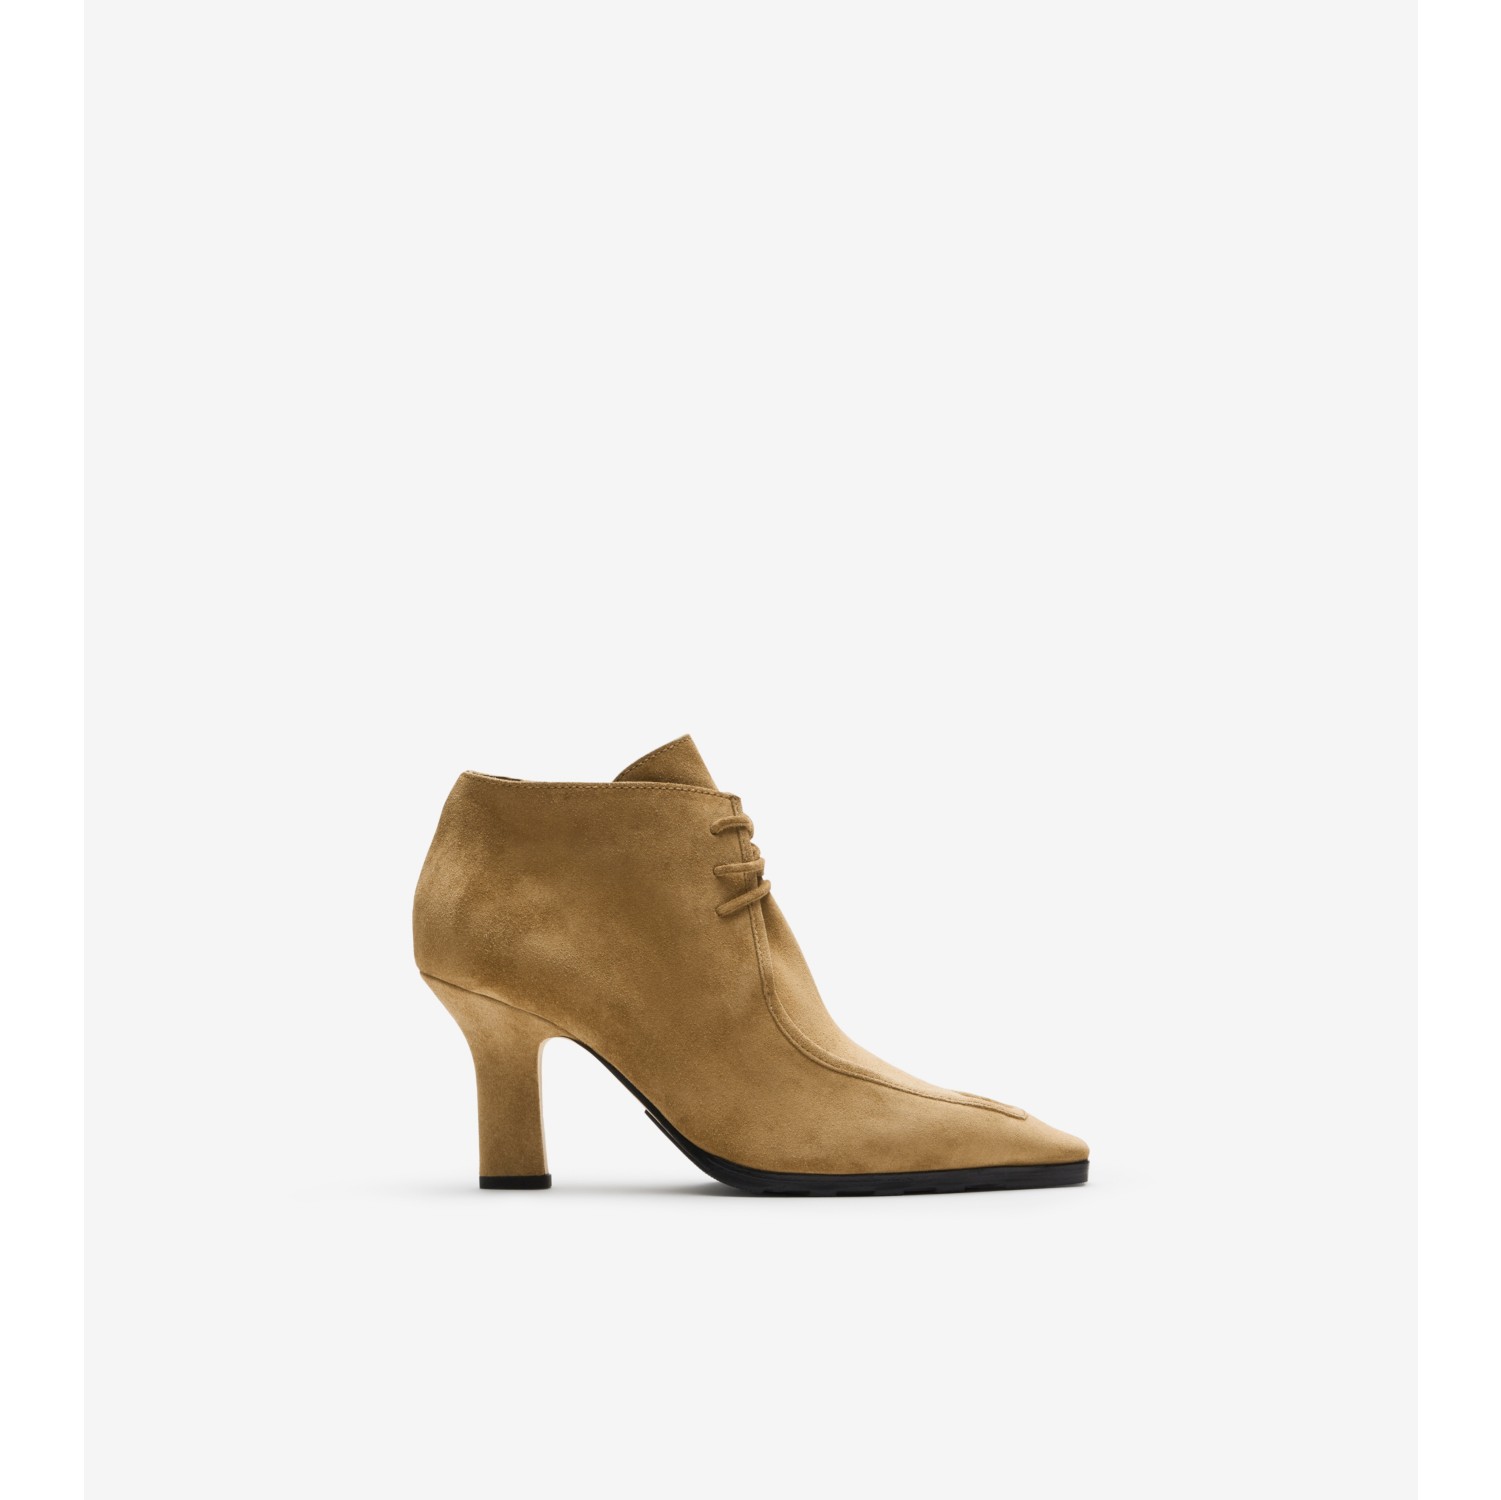 Suede Storm Ankle Boots in Jute - Women